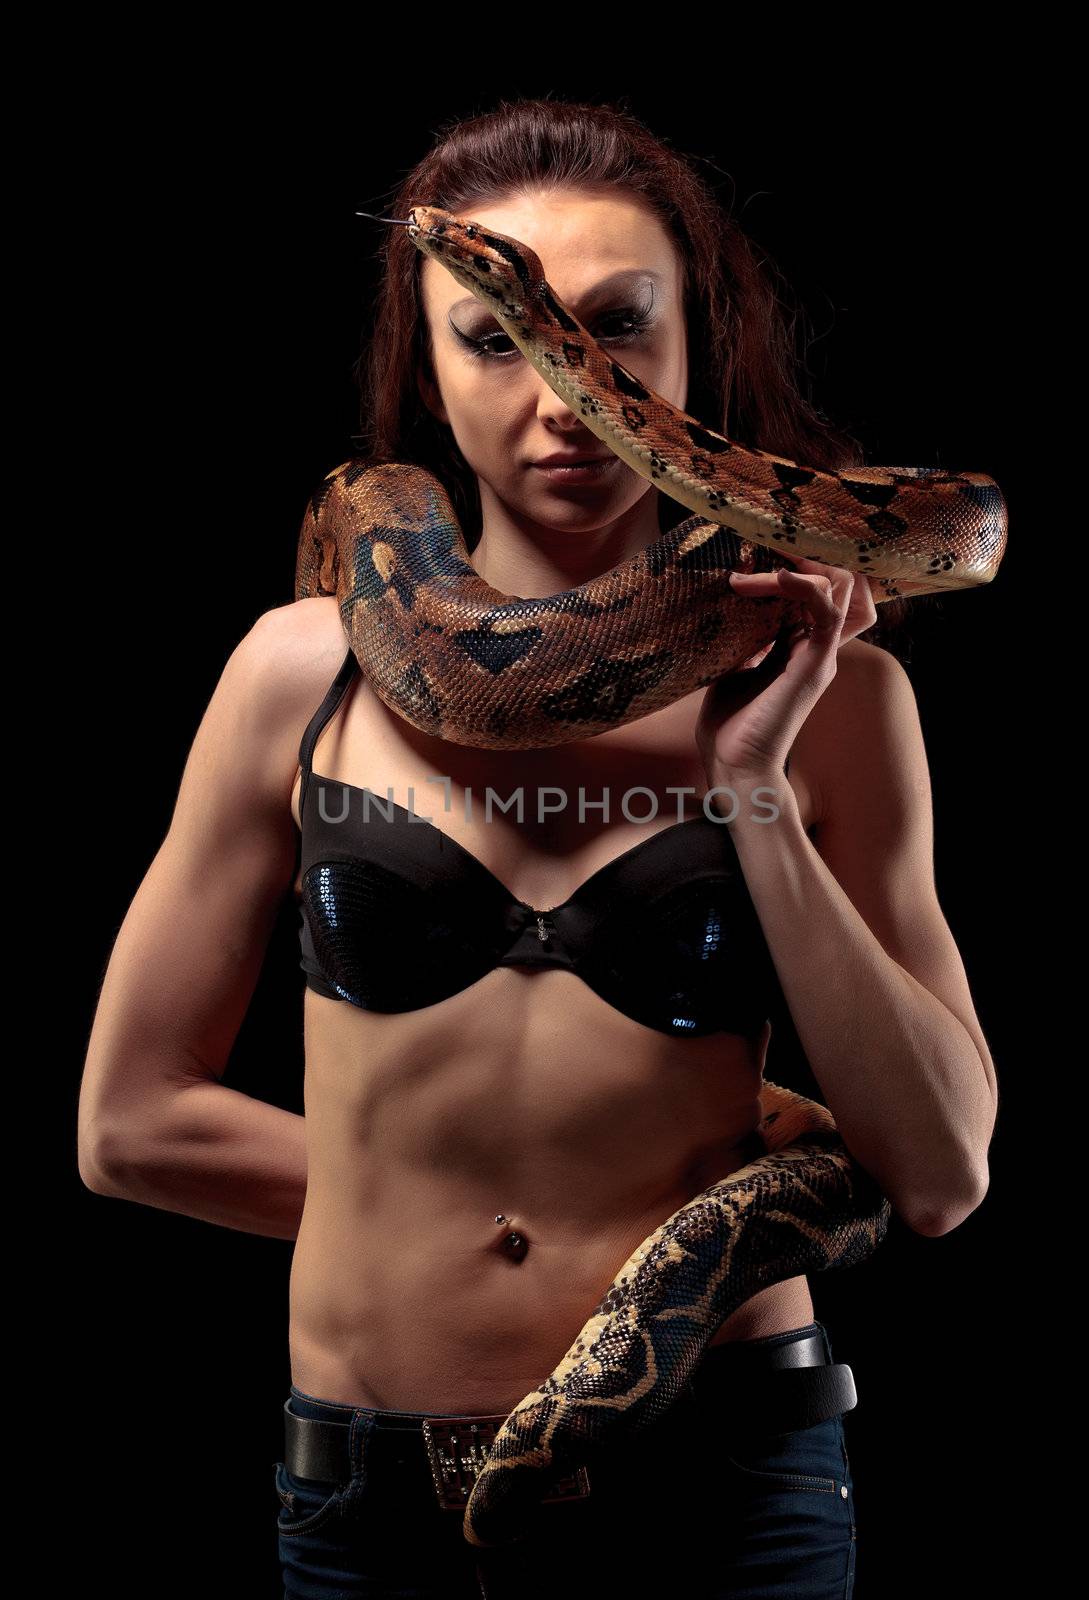 Exotic Woman with a Boa by Discovod